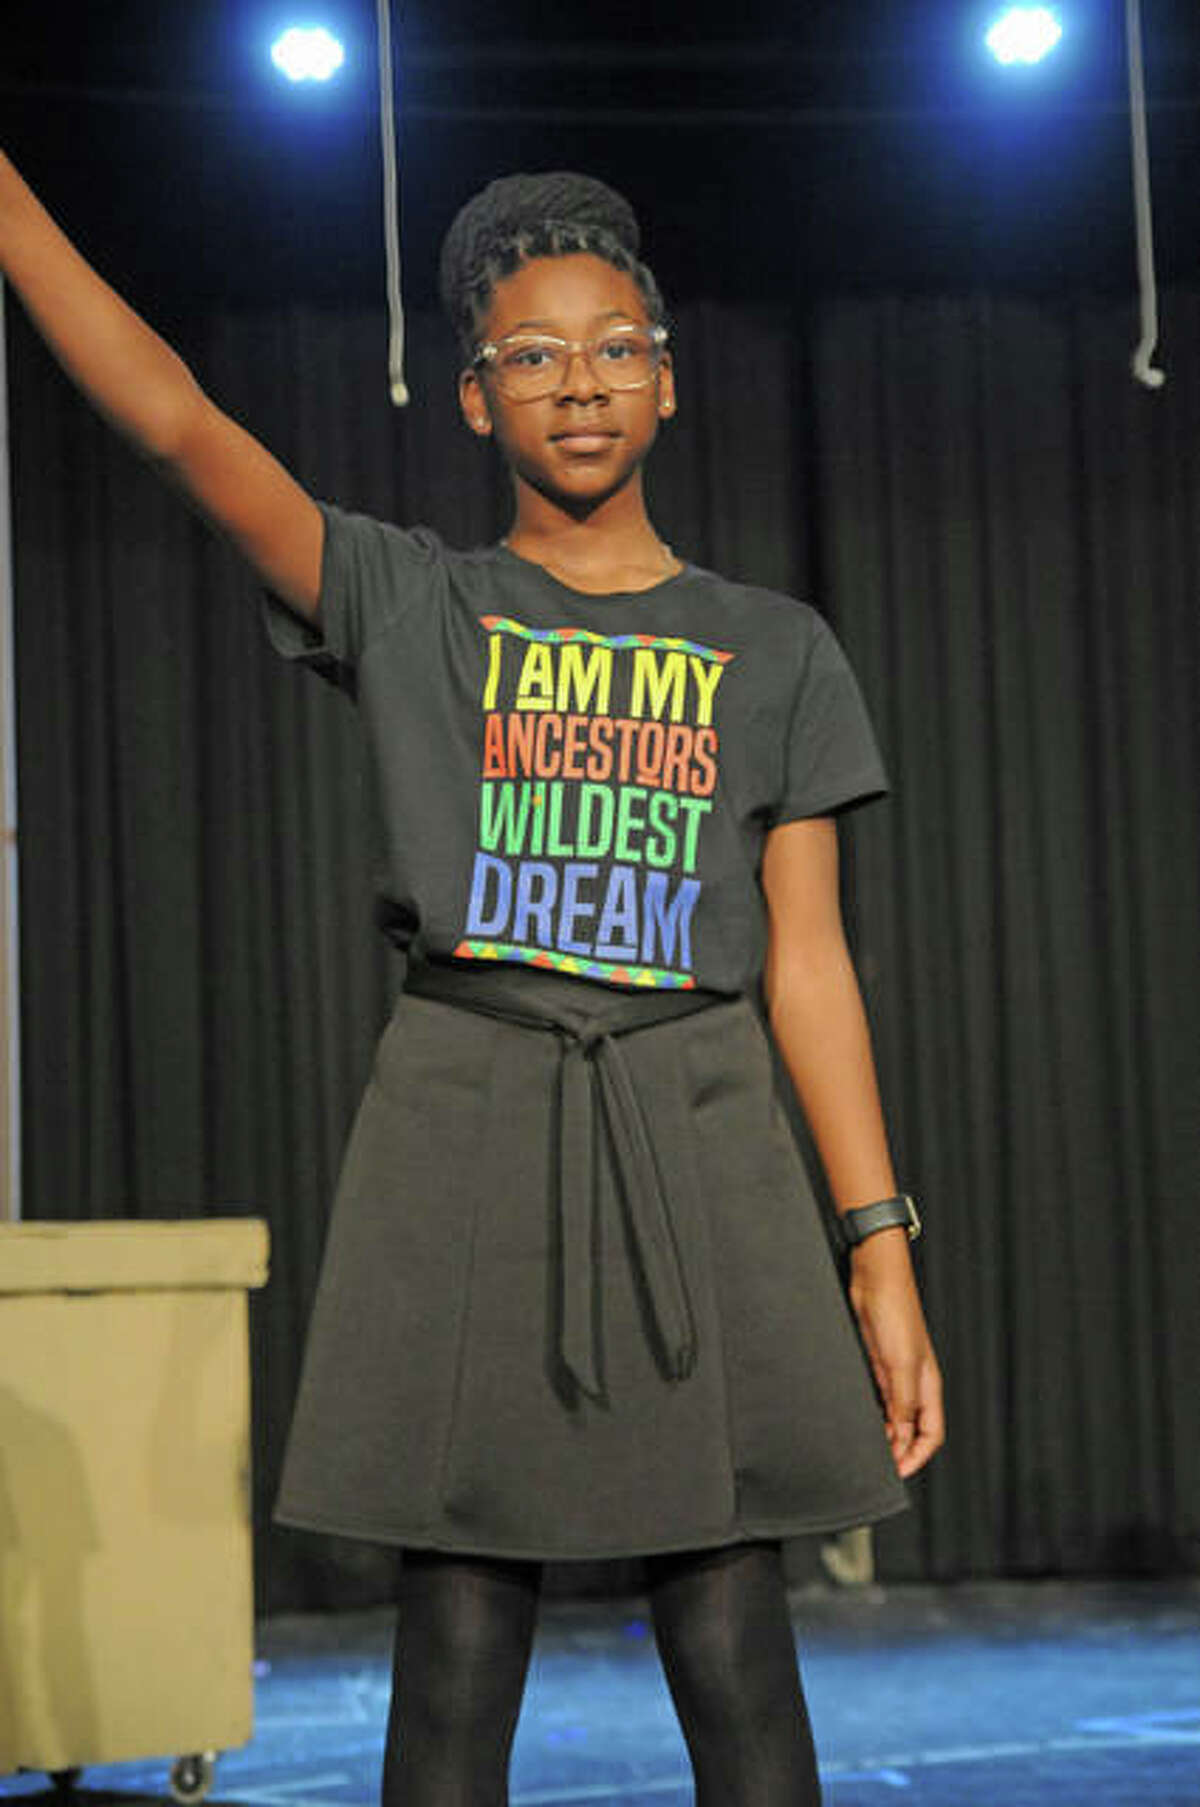 Kennedy Lacey, 12, of Alton performs during “Change to Passage” at Sunday’s Black History Month program.